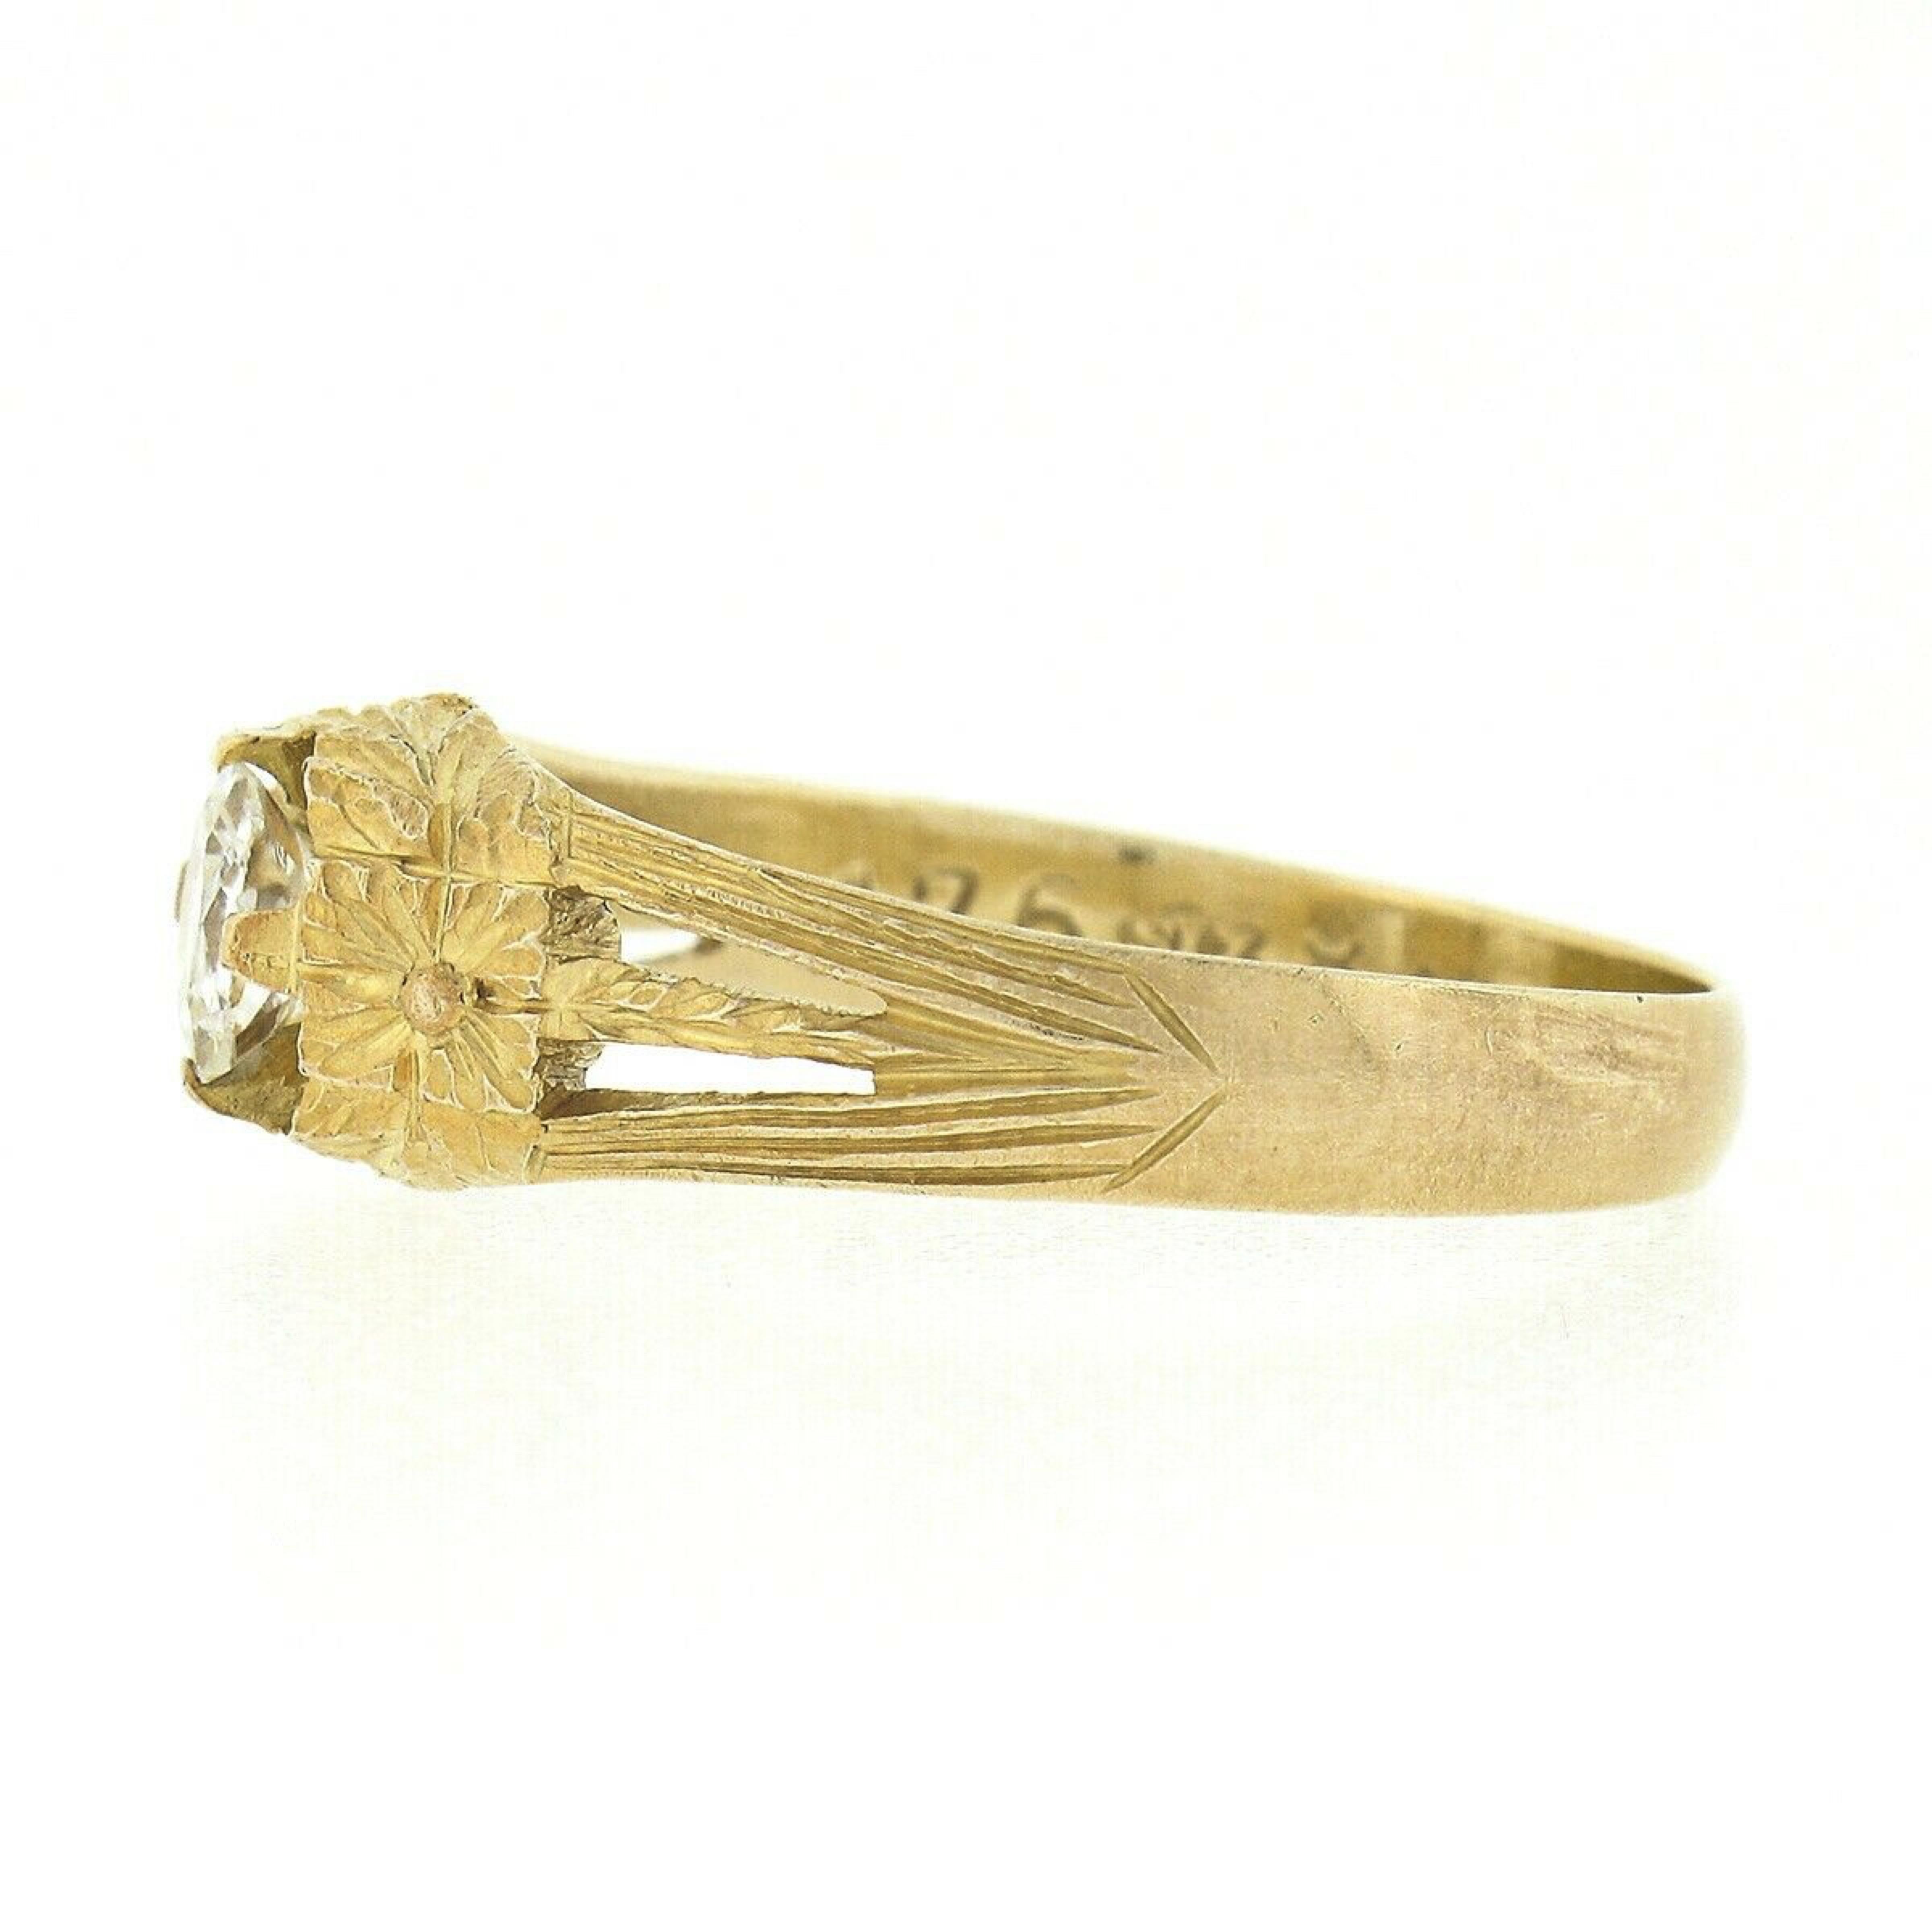 Antique Art Nouveau 14k Gold Old Mine Cut Diamond Hand Engraved Engagement Ring In Good Condition For Sale In Montclair, NJ